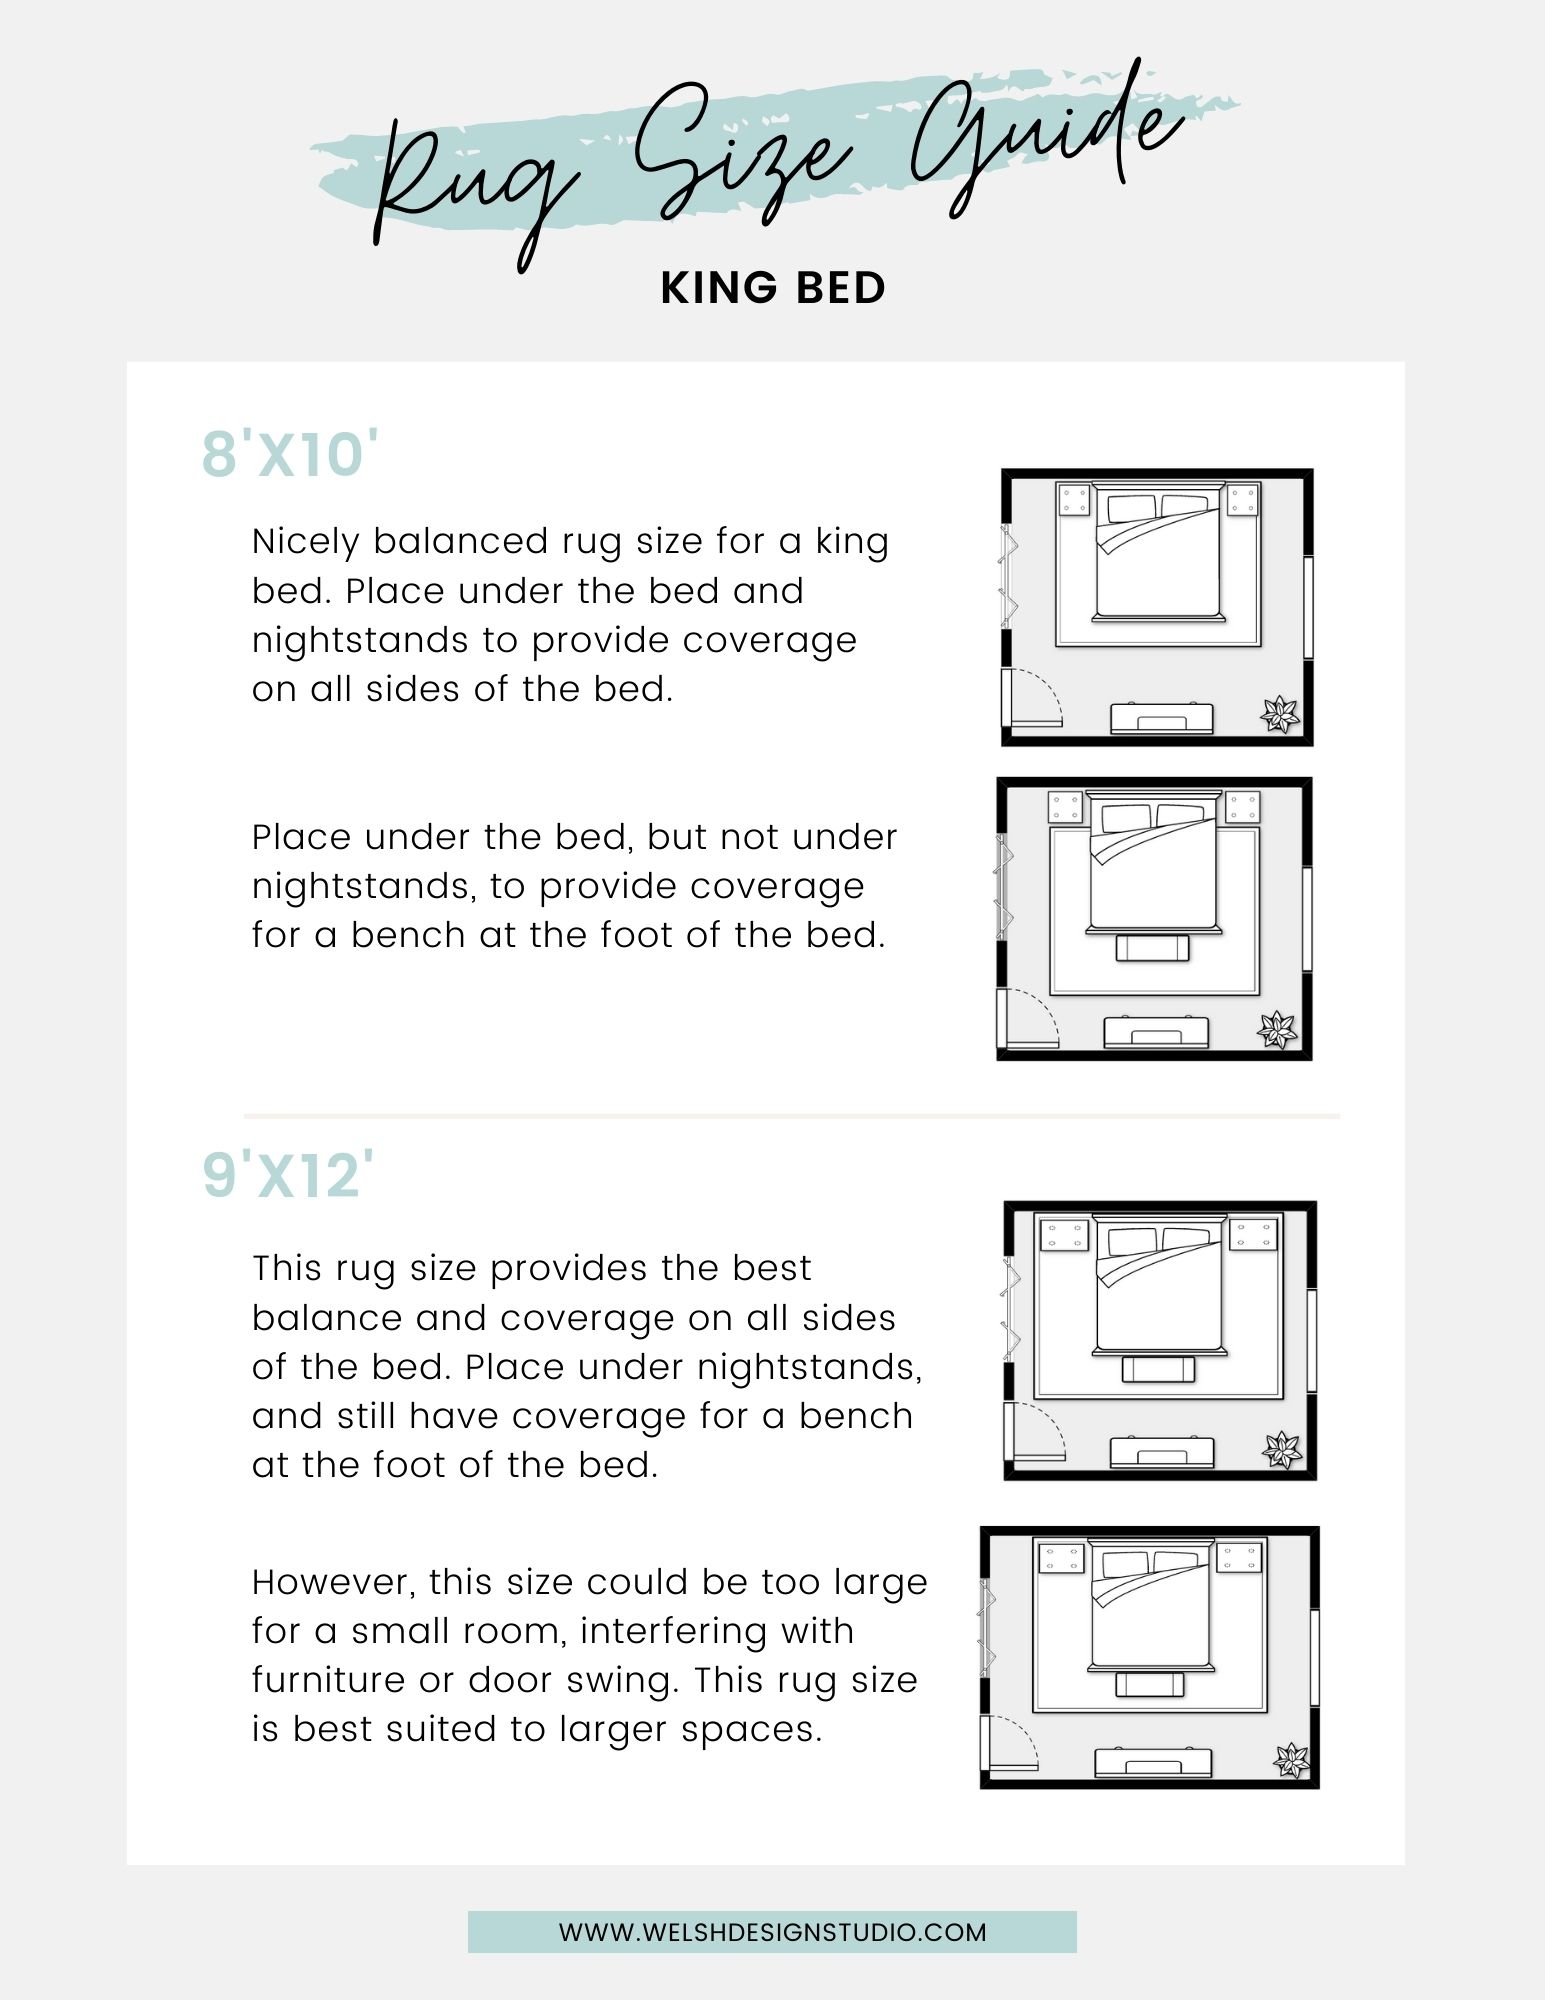 What Is the Correct Rug Size for a King Size Bed? – Tumble